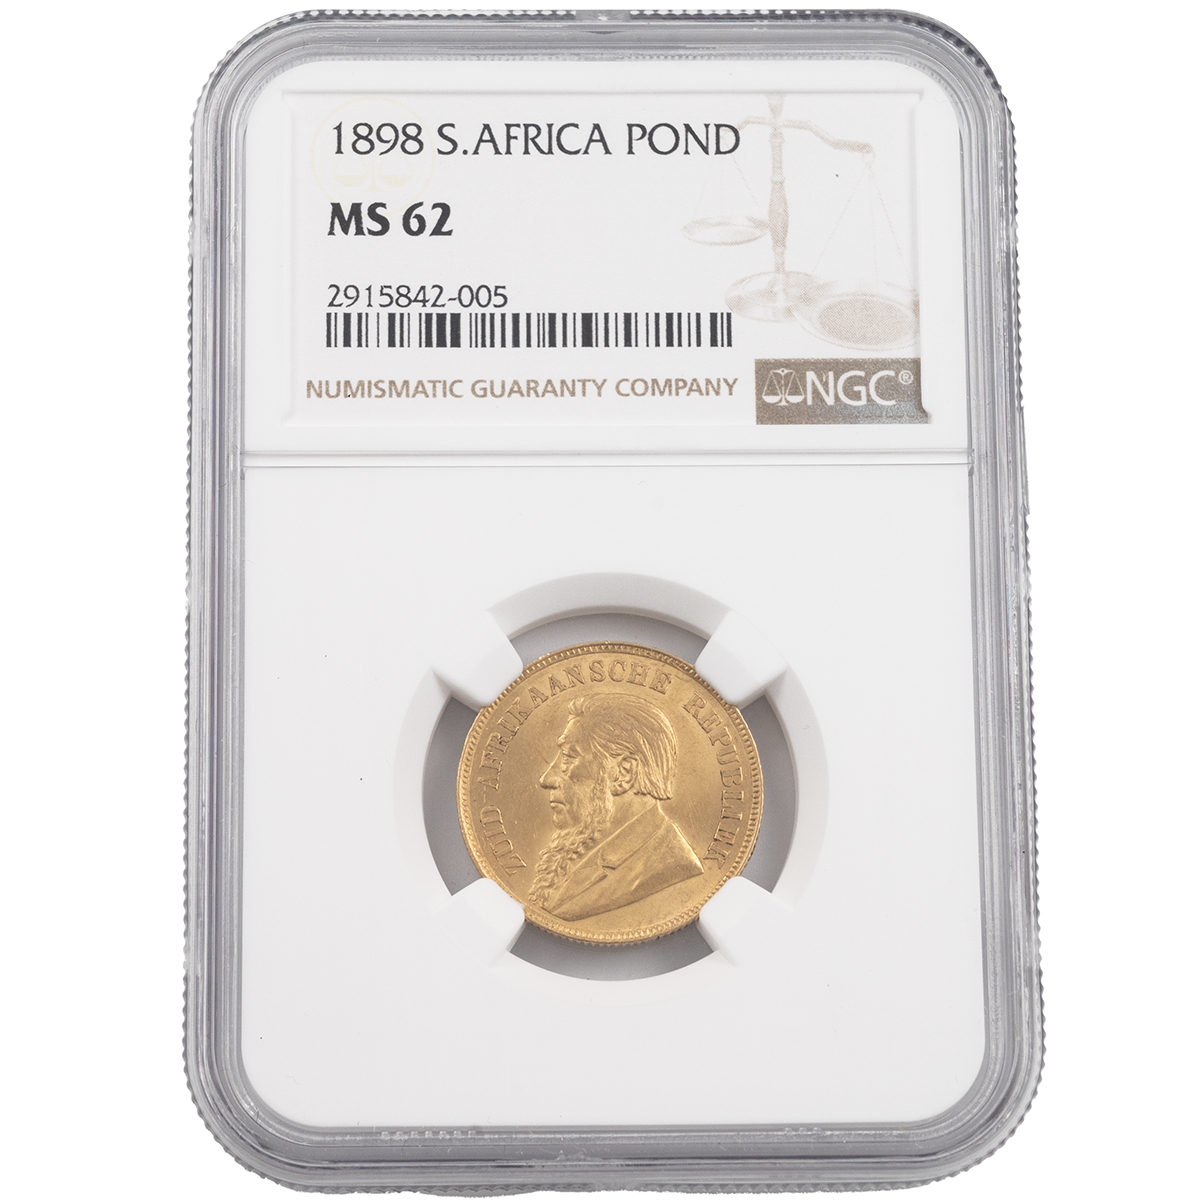 1898 South Africa Z.A.R. 22-carat gold Pond coin graded MS 62 and sealed in holder by NGC. Obvers...